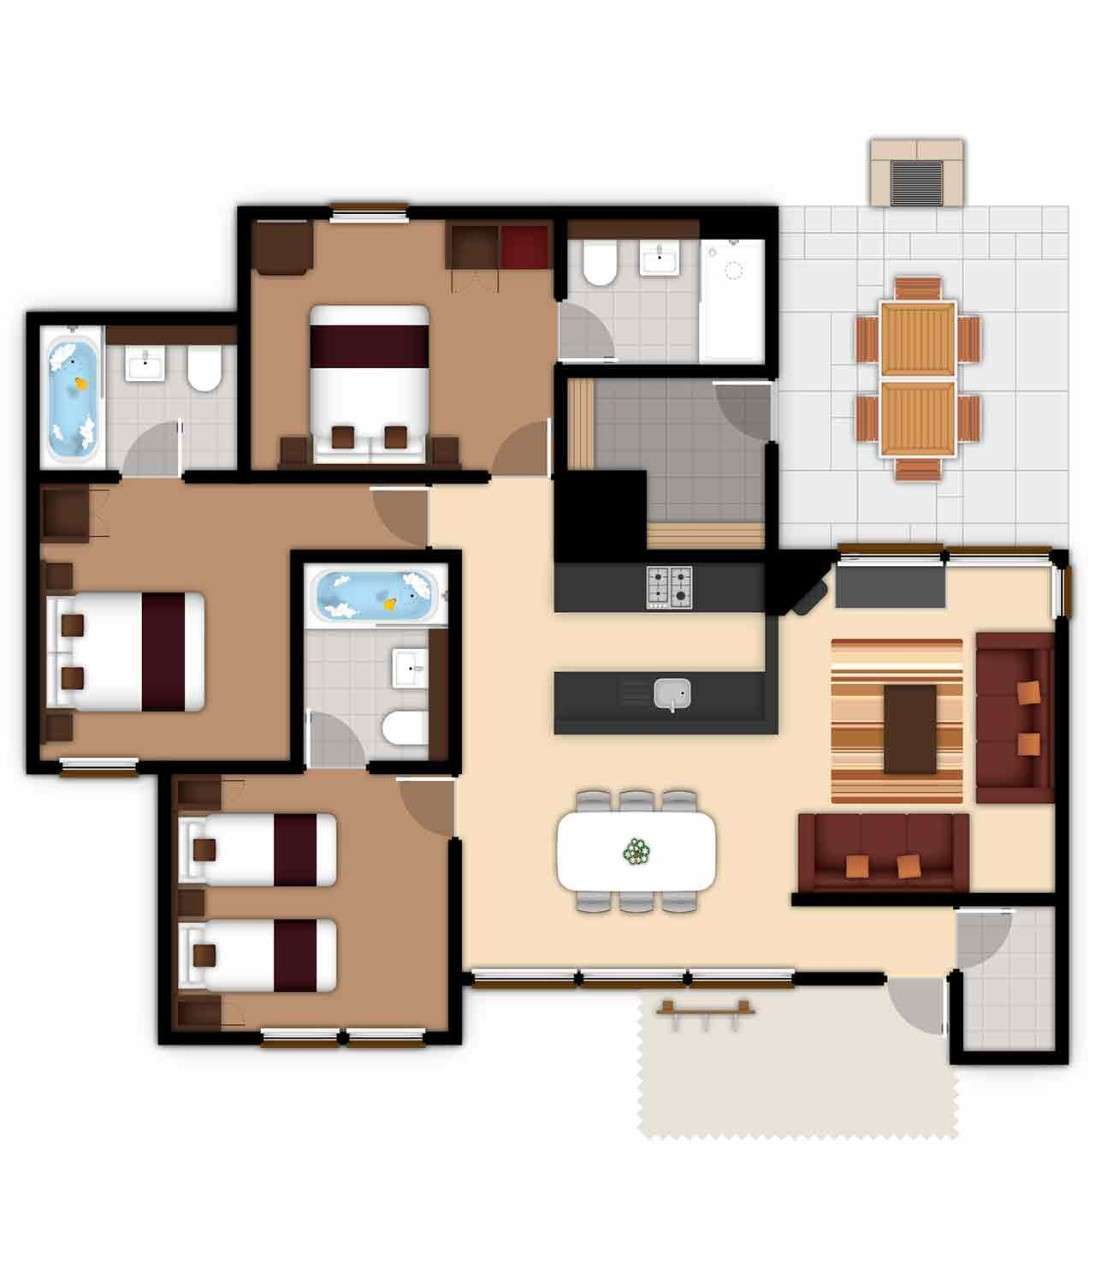 A detailed floor plan illustration of a three bedroom Executive Lodge. If you require further assistance viewing the floor plan or need further information please contact Guest Services.